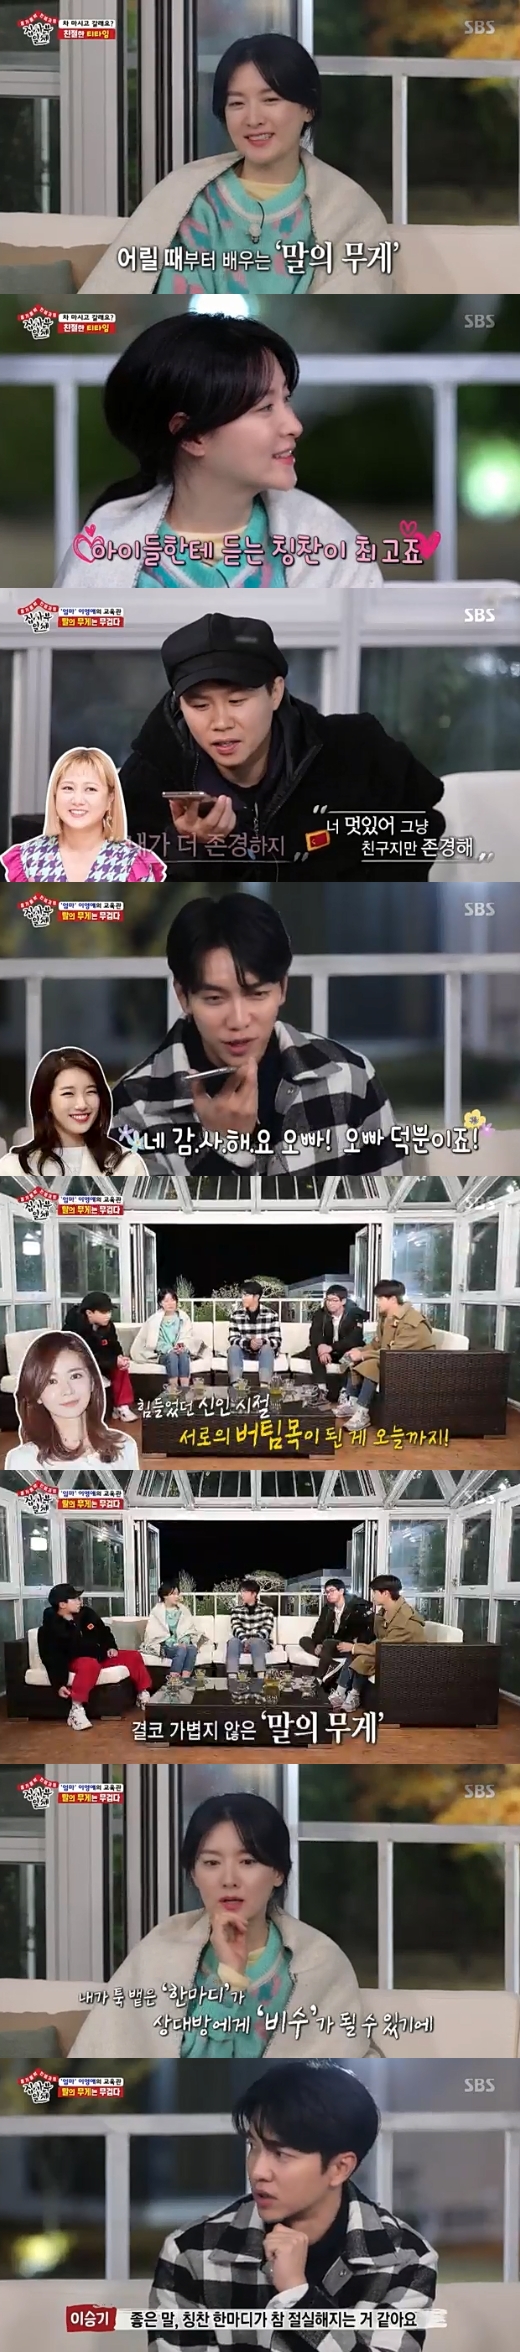 Lee Yeong-ae revealed her mother, not an actor, as well as conveying her thoughts on the weight of words.Actor Lee Yeong-ae appeared as master on SBS All The Butlers, which aired on the afternoon of the 1st, following last week.Lee Yeong-ae, twin I-DLE winner, Seung Bin, Lee Seung-gi, Lee Sang-yoon, Yook Sungjae and Yang Se-hyeong had a good time.Seung Bin laughed with an entertainment feeling, and the victory was amazed by his amazing scientific knowledge.Lee Yeong-ae and All The Butlers members who have a meal time.Lee Yeong-ae said, When I walk to Itaewon and walk with a groom, sometimes someone brings flowers.Middle Easters, he said of the explosive popularity of Dae Jang-geum in Middle East, where TV viewer ratings were close to 90%.The day was also revealed. Lee Yeong-ae said, I go to school in the morning, I follow a lot of kids.Im married late, especially in my case, so I know more about the importance of family, so Im going to be with I-DLE if I can, he said.Lee Seung-gi said, I thought I would be so happy if I had a family while I was looking at it. Lee Yeong-ae said, It seems to be a great strength.Because of the idea that Im on my side.When asked what he was doing at this time, Lee Yeong-ae said, Its time to wash and put them to bed. And let me see what Im doing.Most of our daily lives do, he said.The most pleasant compliment I have heard recently was that I-DLE said, My mothers doing is the best. He expressed his affection for I-DLE, saying, The praise for I-DLE is the best.(I-DLE) have him practice.I love you whenever I can, thank you, always hug me, make me express delicious if I want to taste it, and practice it so that I can come out right away. I had time to practice praise. Yang Se-hyeong called Park Na-rae, Lee Seung-gi was Suzie, and Lee Yeong-ae called Jang Seo-hee and conveyed his sincerity.Lee Yeong-ae said, I love you when I can, and I think it would be a habit to continue practicing as part of the practice.Yook Sungjae, who heard this, said, Even if you write on SNS, it may be very impressed and powerful with a small word. Yang Se-hyeong said, Sometimes it is the opposite.Lee Seung-gi, who was listening to this, said, The horse seems to be very scary and powerful.Lee Yeong-ae said, There are many friends who made their debut early, and such friends are still weak enough to judge themselves in many ways.I think it is very important because I can save and kill people by saying that I am overwhelmed by such words, worry about myself, and have a lot of bad things. Lee Seung-gi agreed, saying, It seems that a good word, a word of praise, is a fortress that is really desperate.